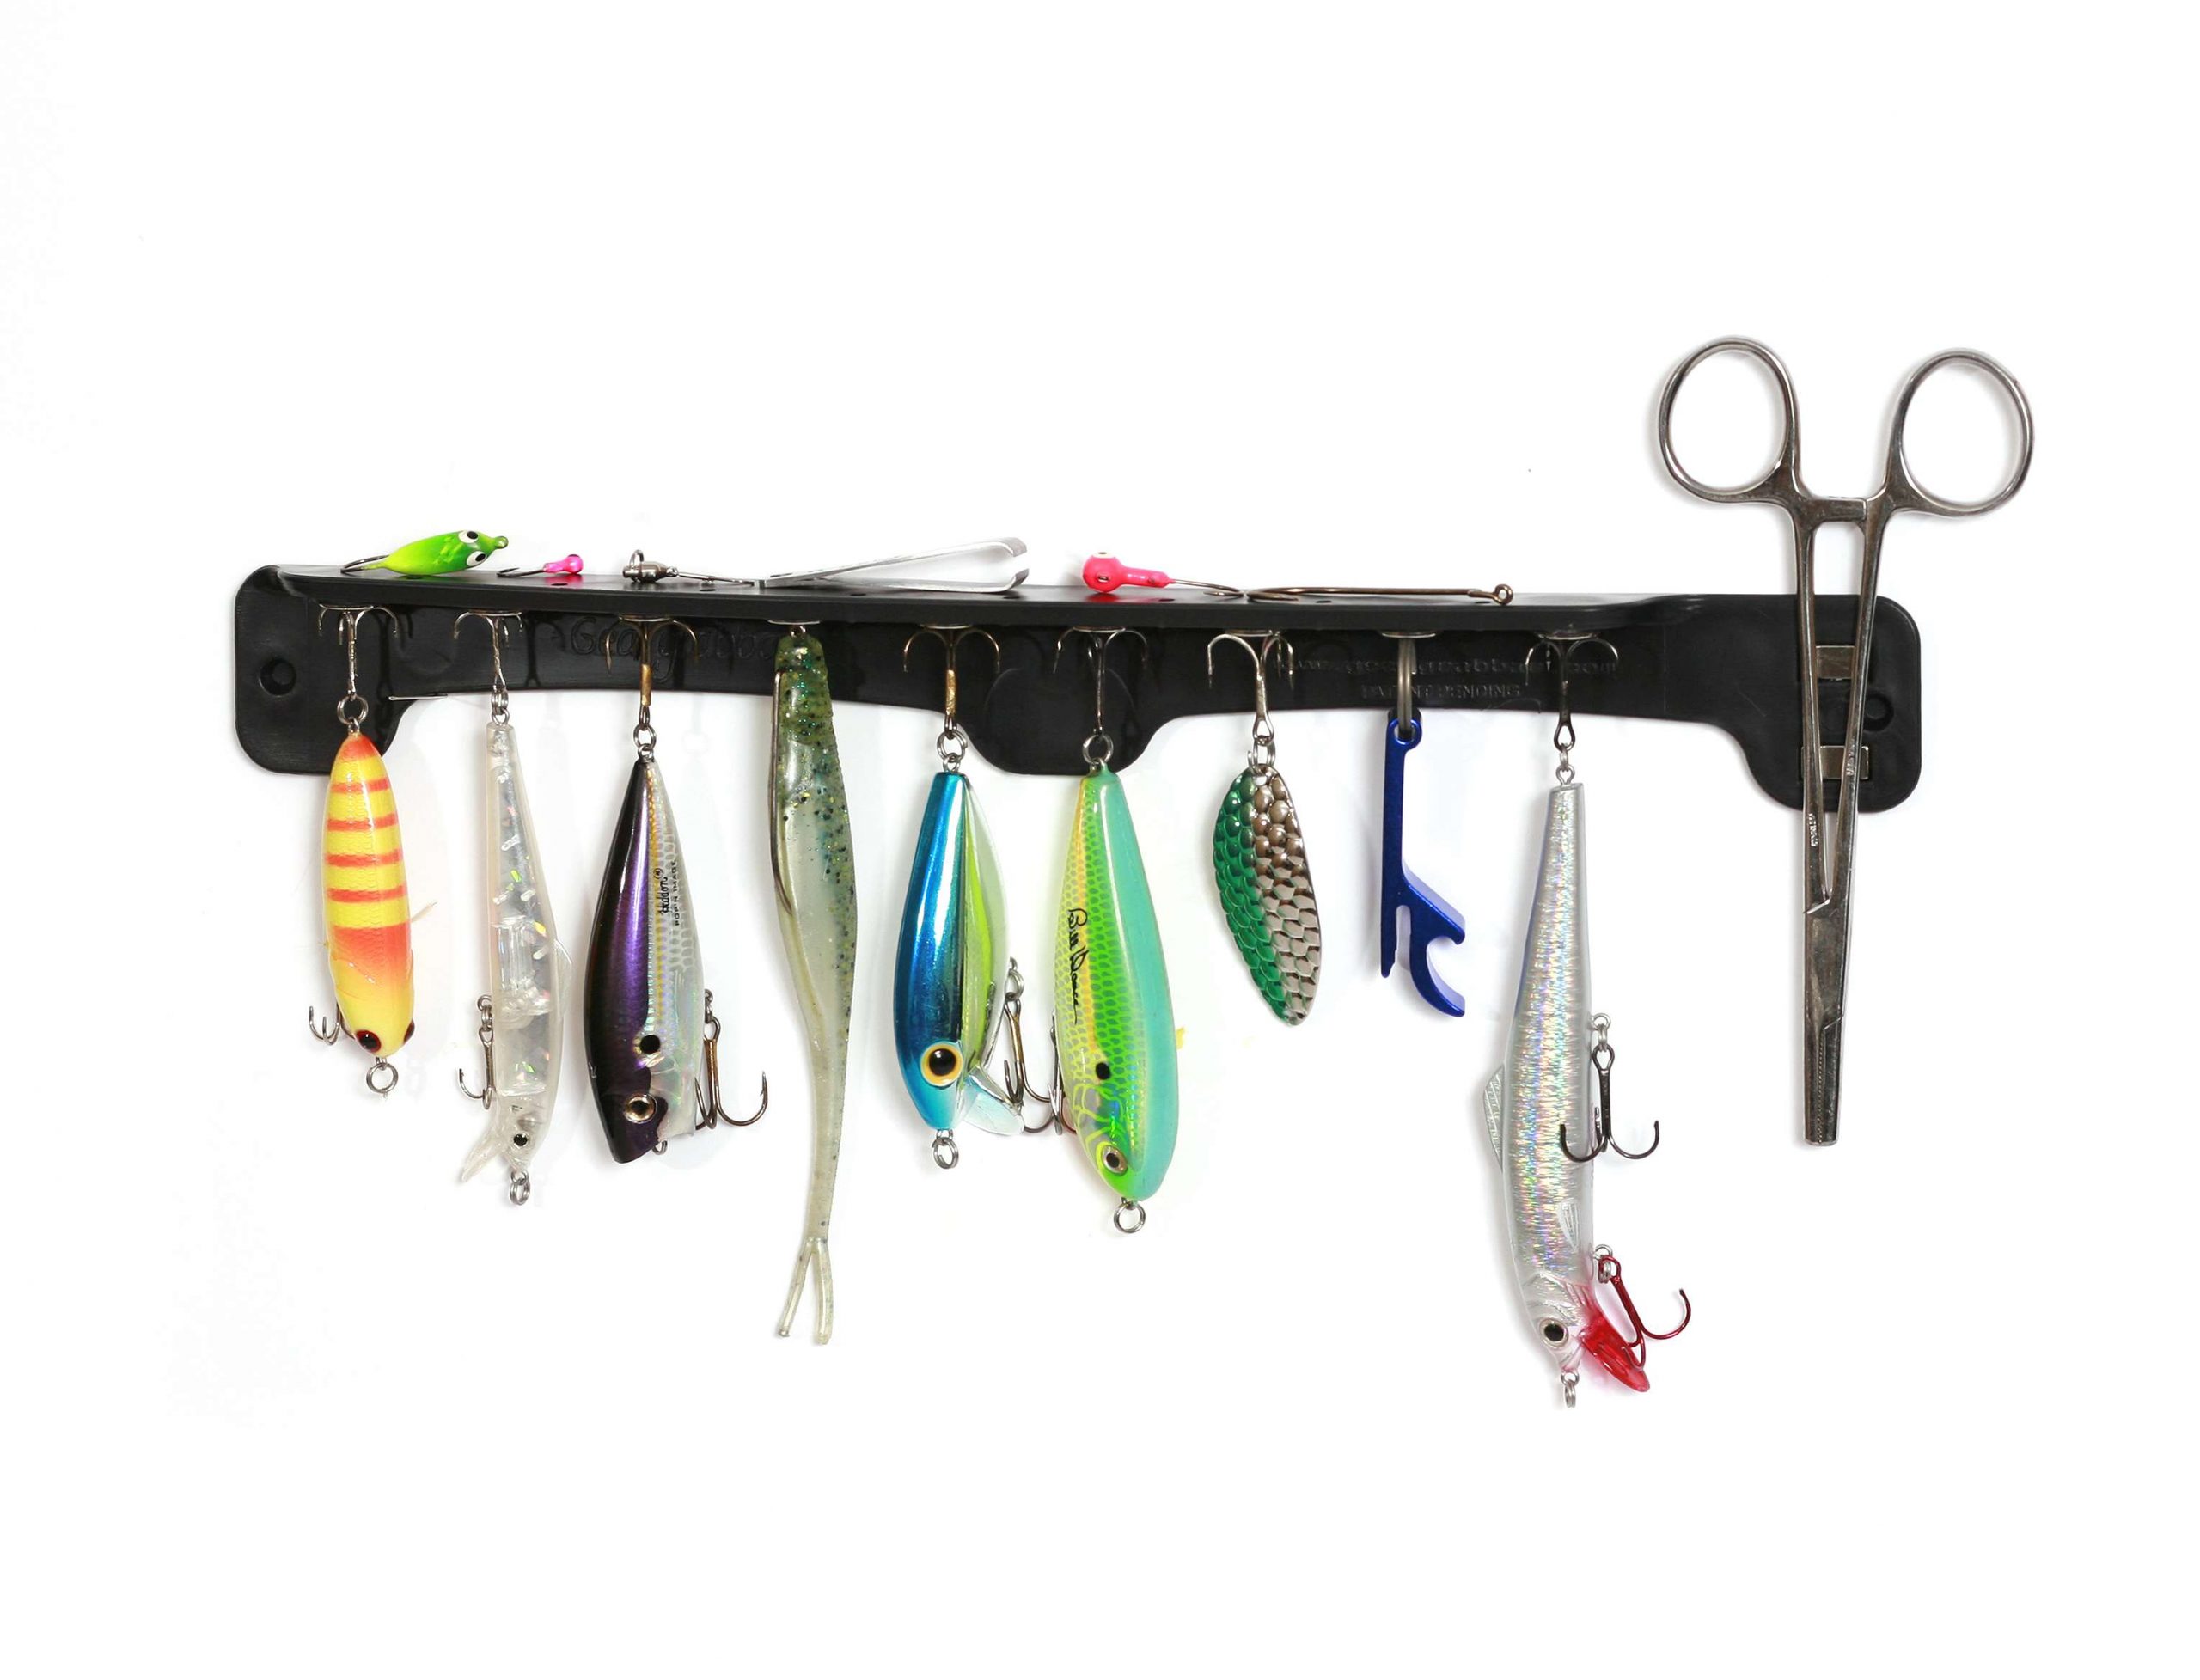 <b>TH Marine Gear Grabbar:</b> Featuring a revolutionary magnetic system, the Gear Grabbar Lure & Tool Holder can hold up to nine lures with its lure magnets, eight lures with its magnetic top shelf slots, one tool and any number of loose hooks, jig heads, swivels, line snips or pocket knives on the magnetic top shelf. It can be mounted on the rail of your boat, kayak or dockâmagnetically (included), adhesive sticking dots (included), or by pre-drilling holes into the unit and attaching via screw. $9.99-$59.99; <a href=